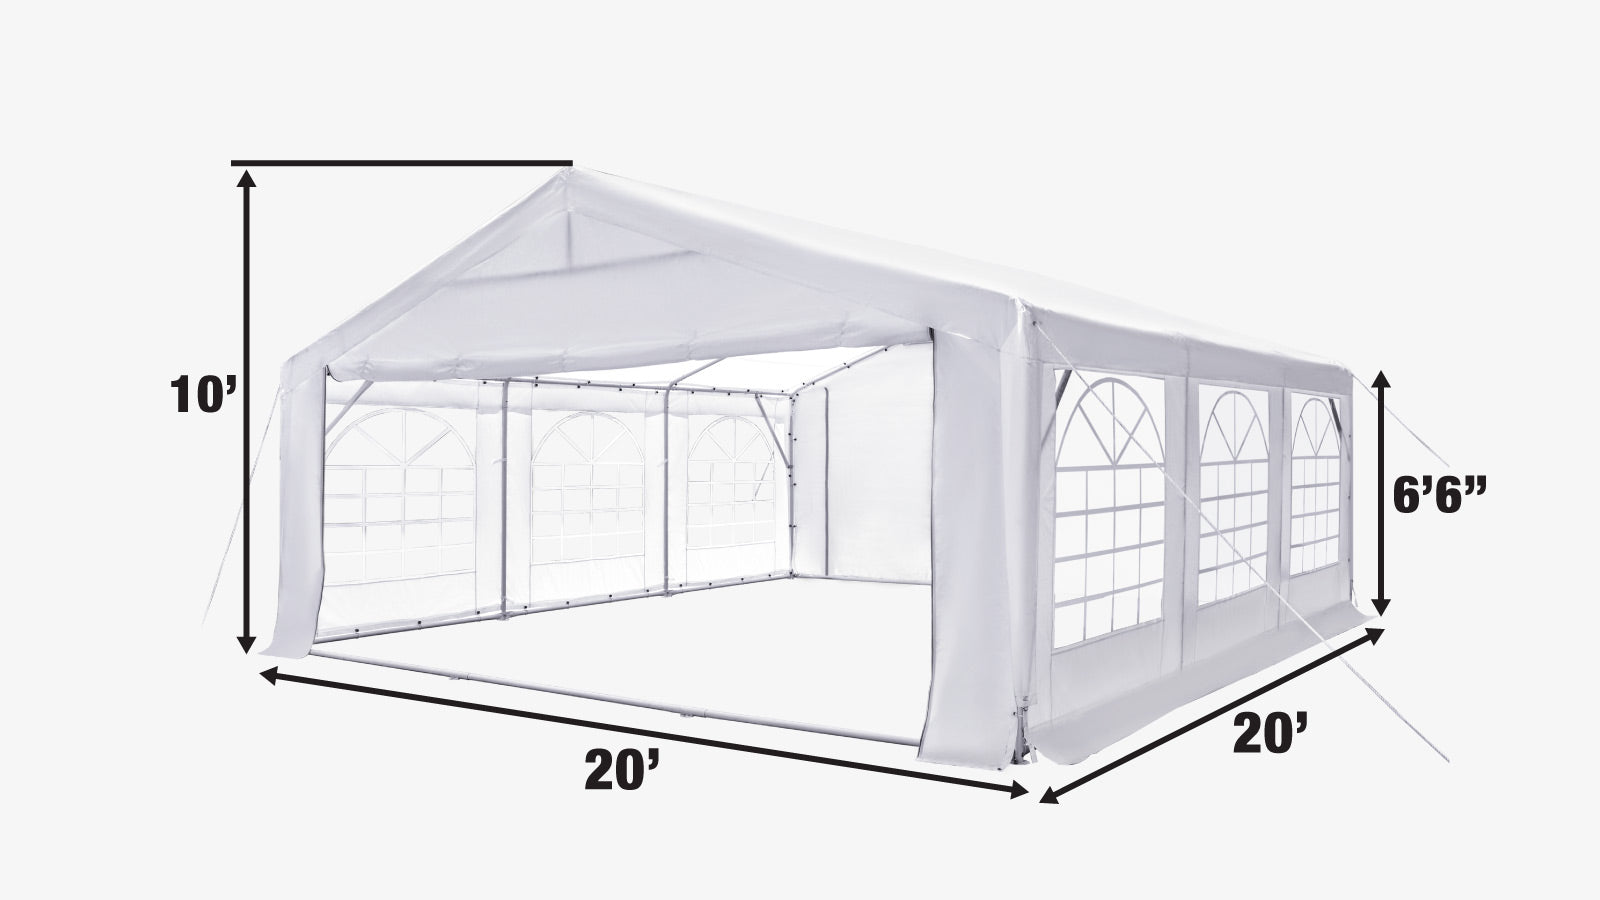 TMG Industrial 20' x 20' Heavy Duty Outdoor Party Tent with Removable Sidewalls and Roll-Up Doors, 11 oz PE Cover, 6’6” Overhead, 10’ Peak Ceiling, TMG-PT2020F-specifications-image